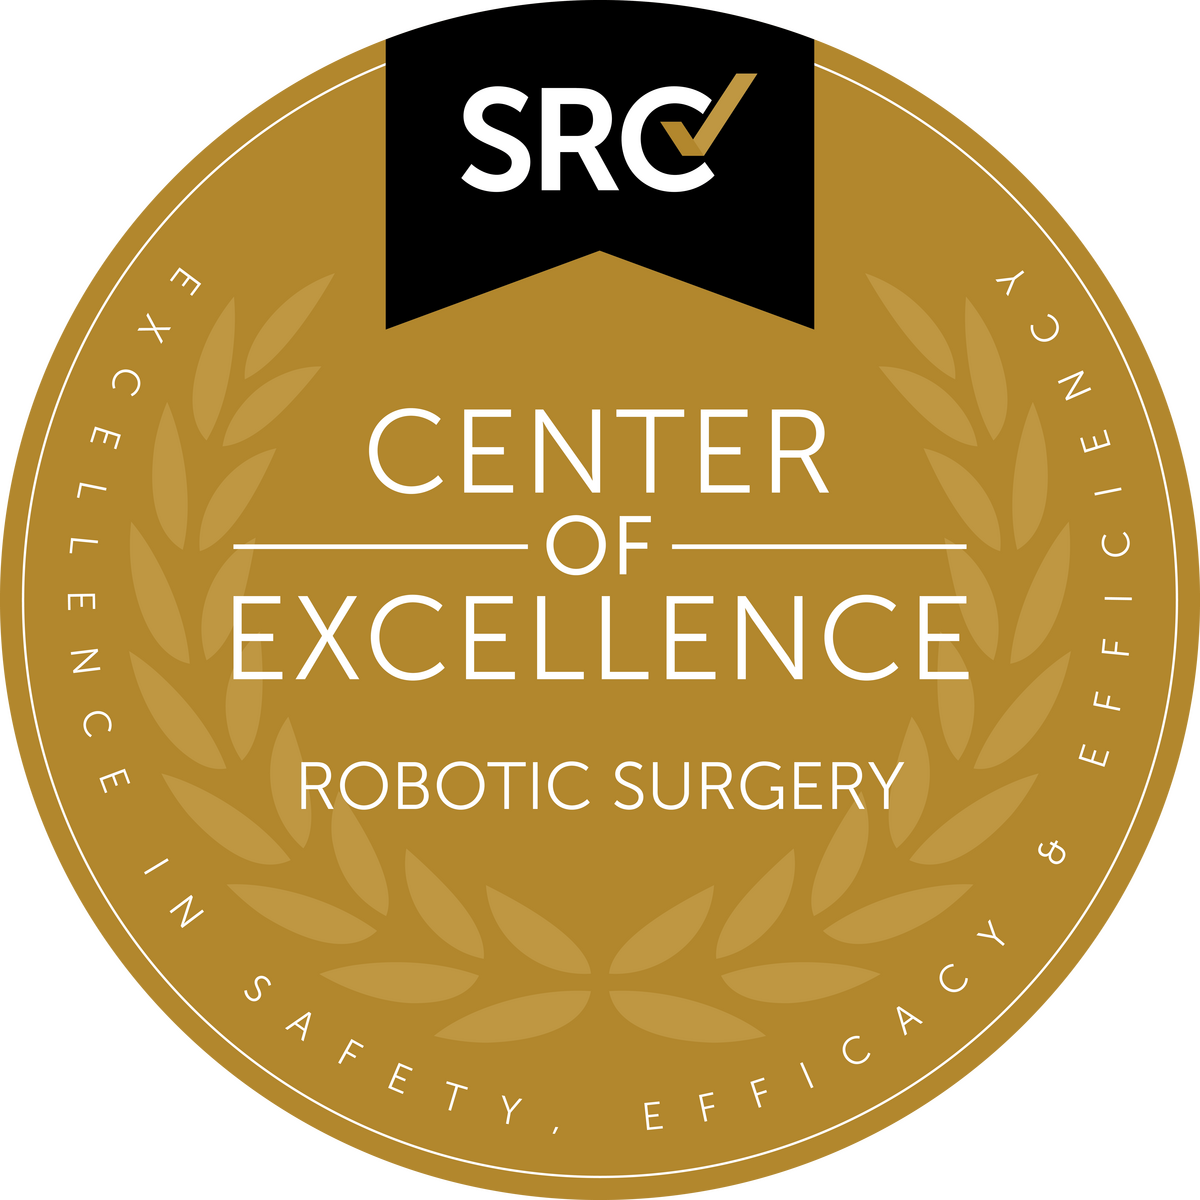 SRC Center of Excellence in Robotic Surgery